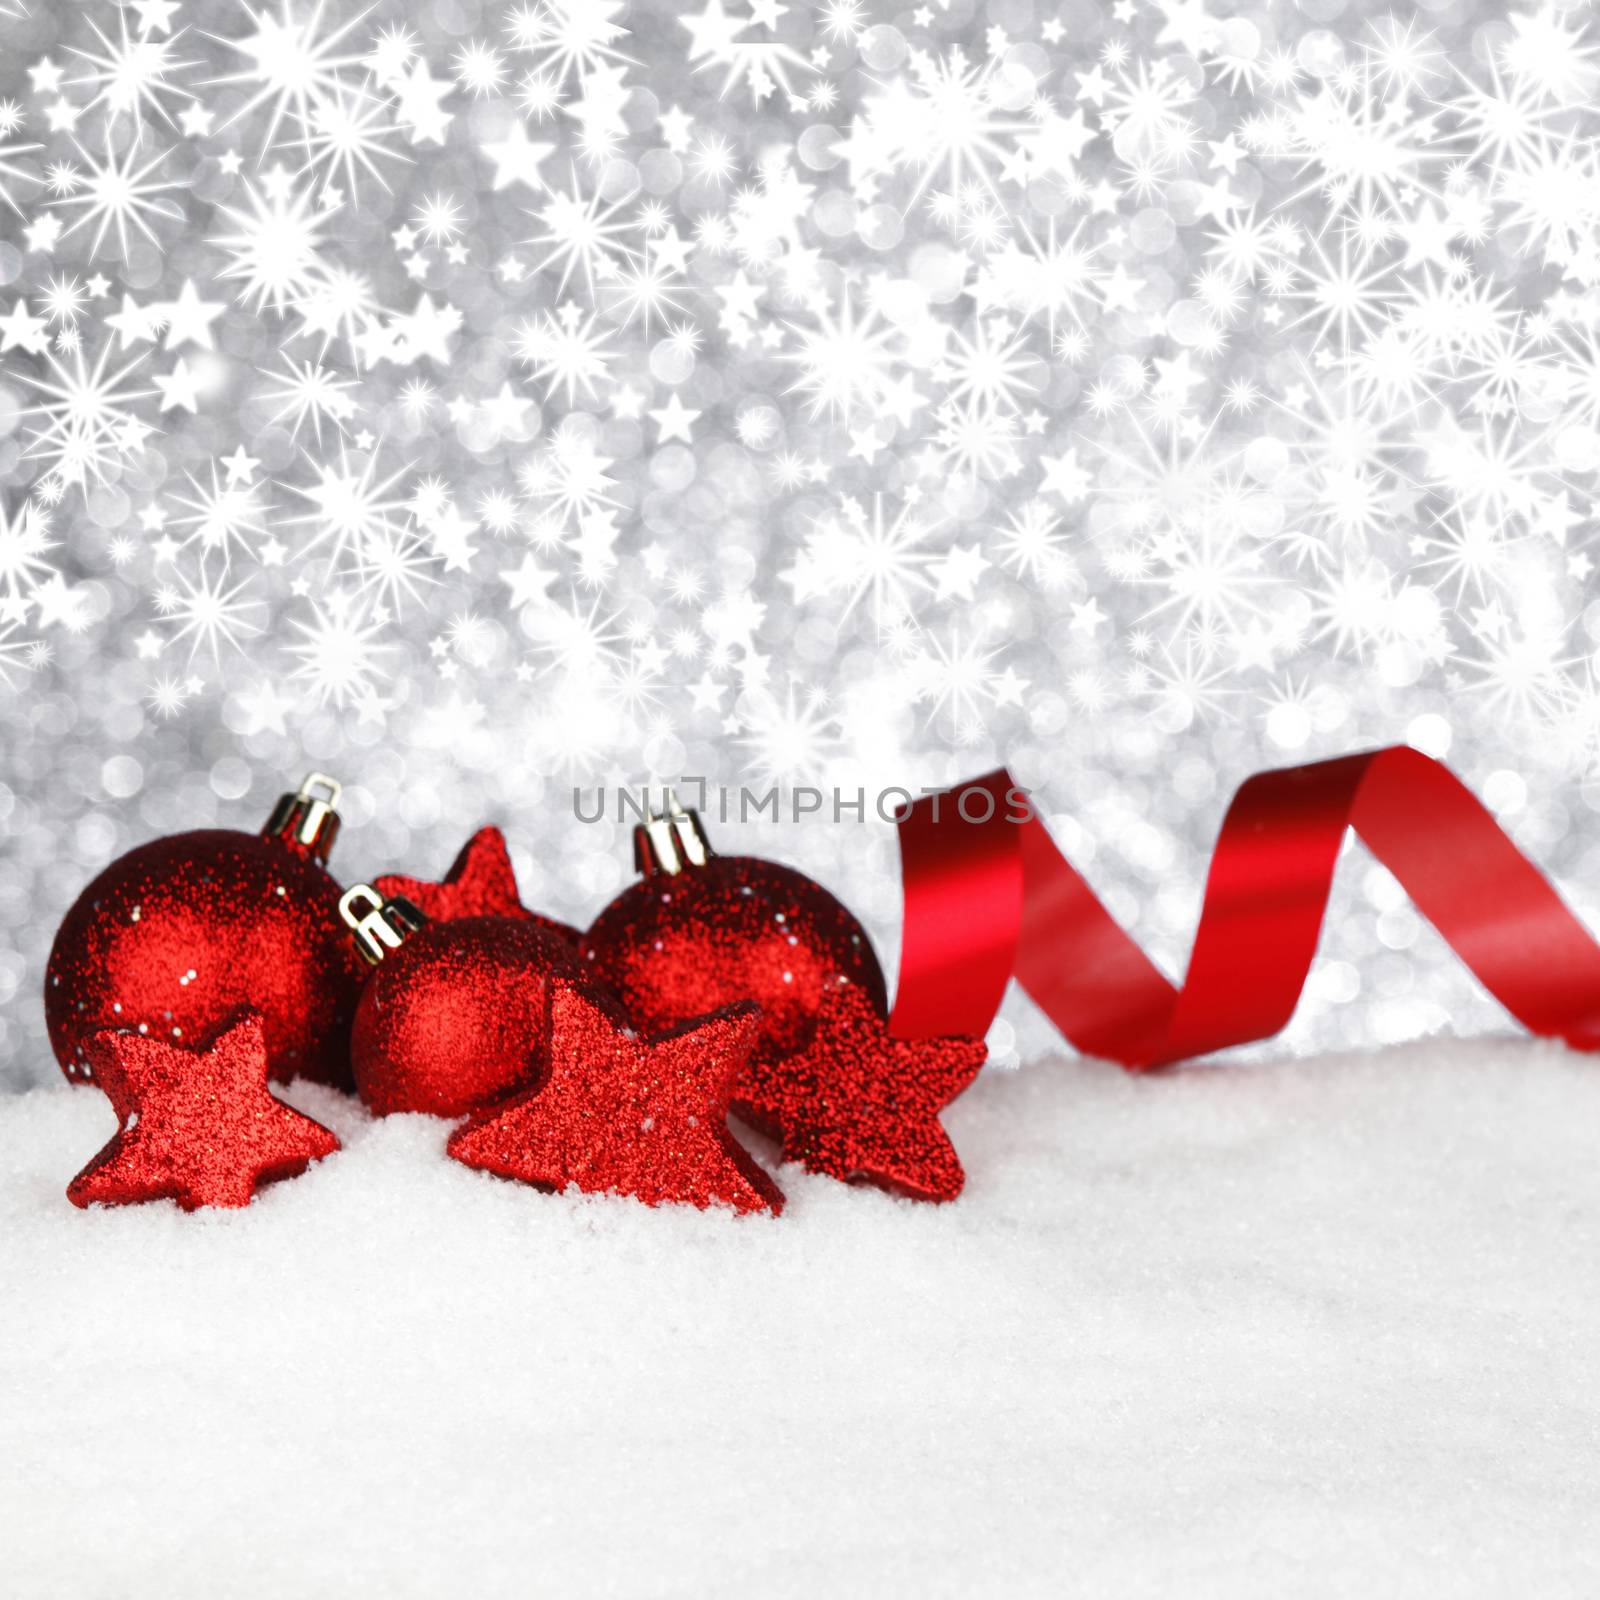 Shiny red christmas decoration on snow over silver glitter background